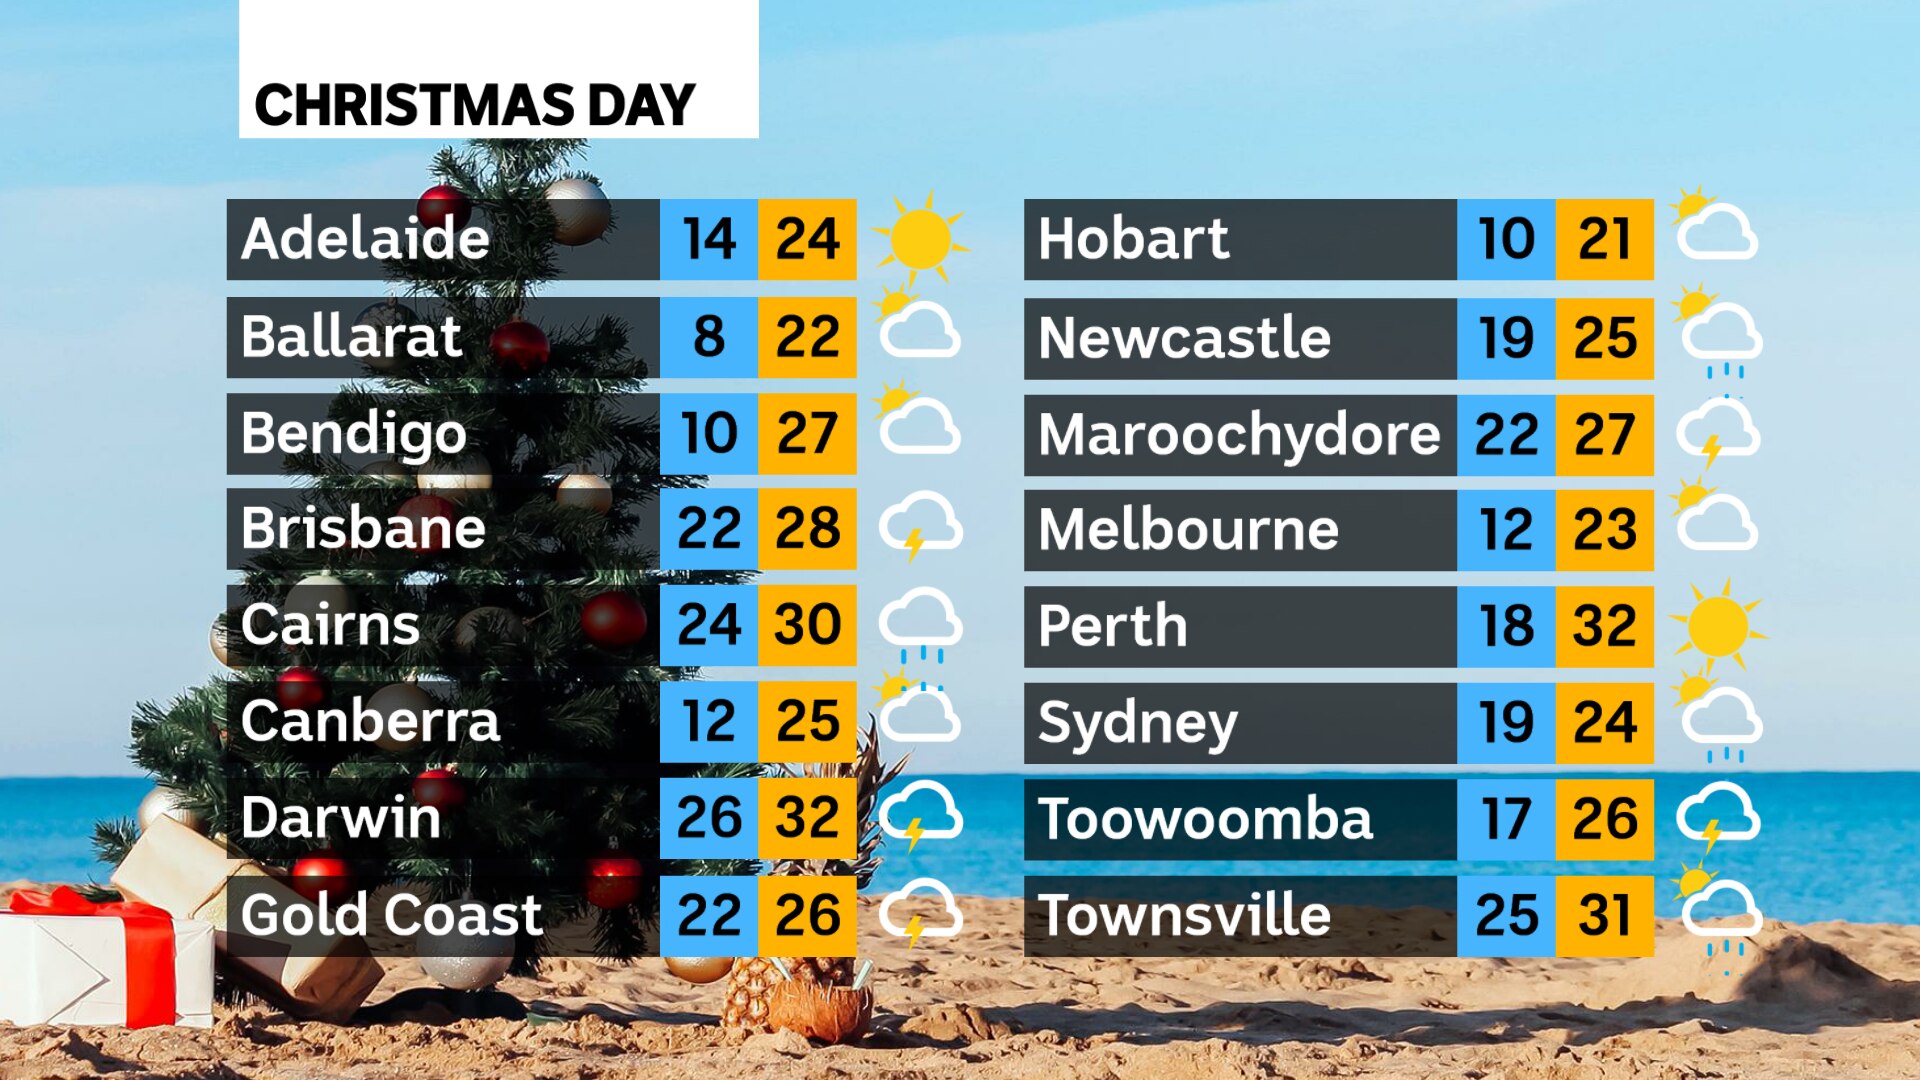 Christmas Day weather forecast predicts showers and thunderstorms down